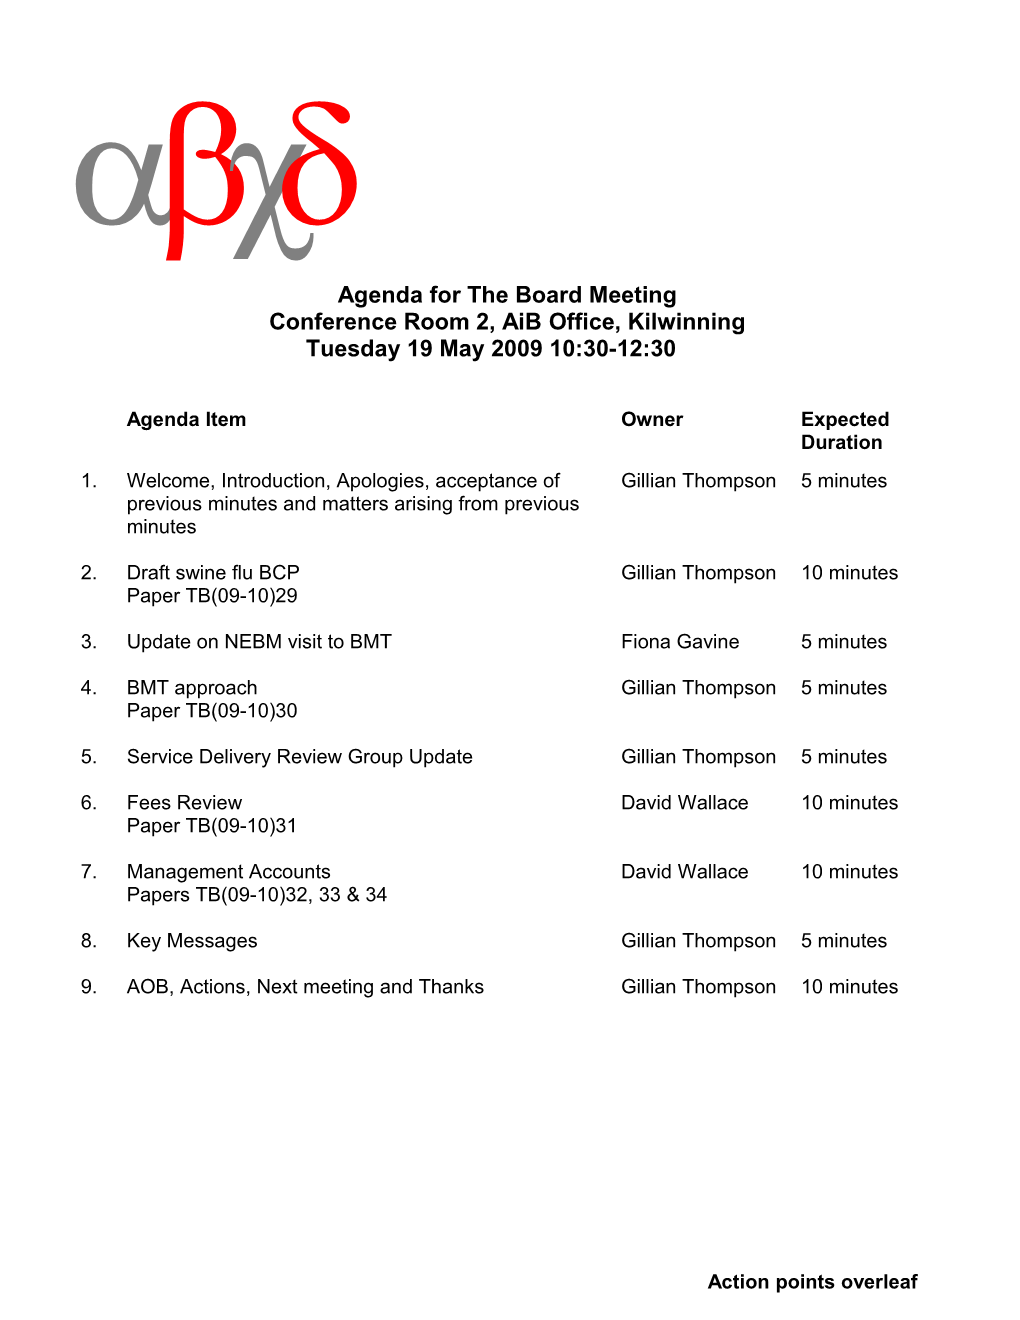 Agenda for Management Board Meeting 15 January at 10